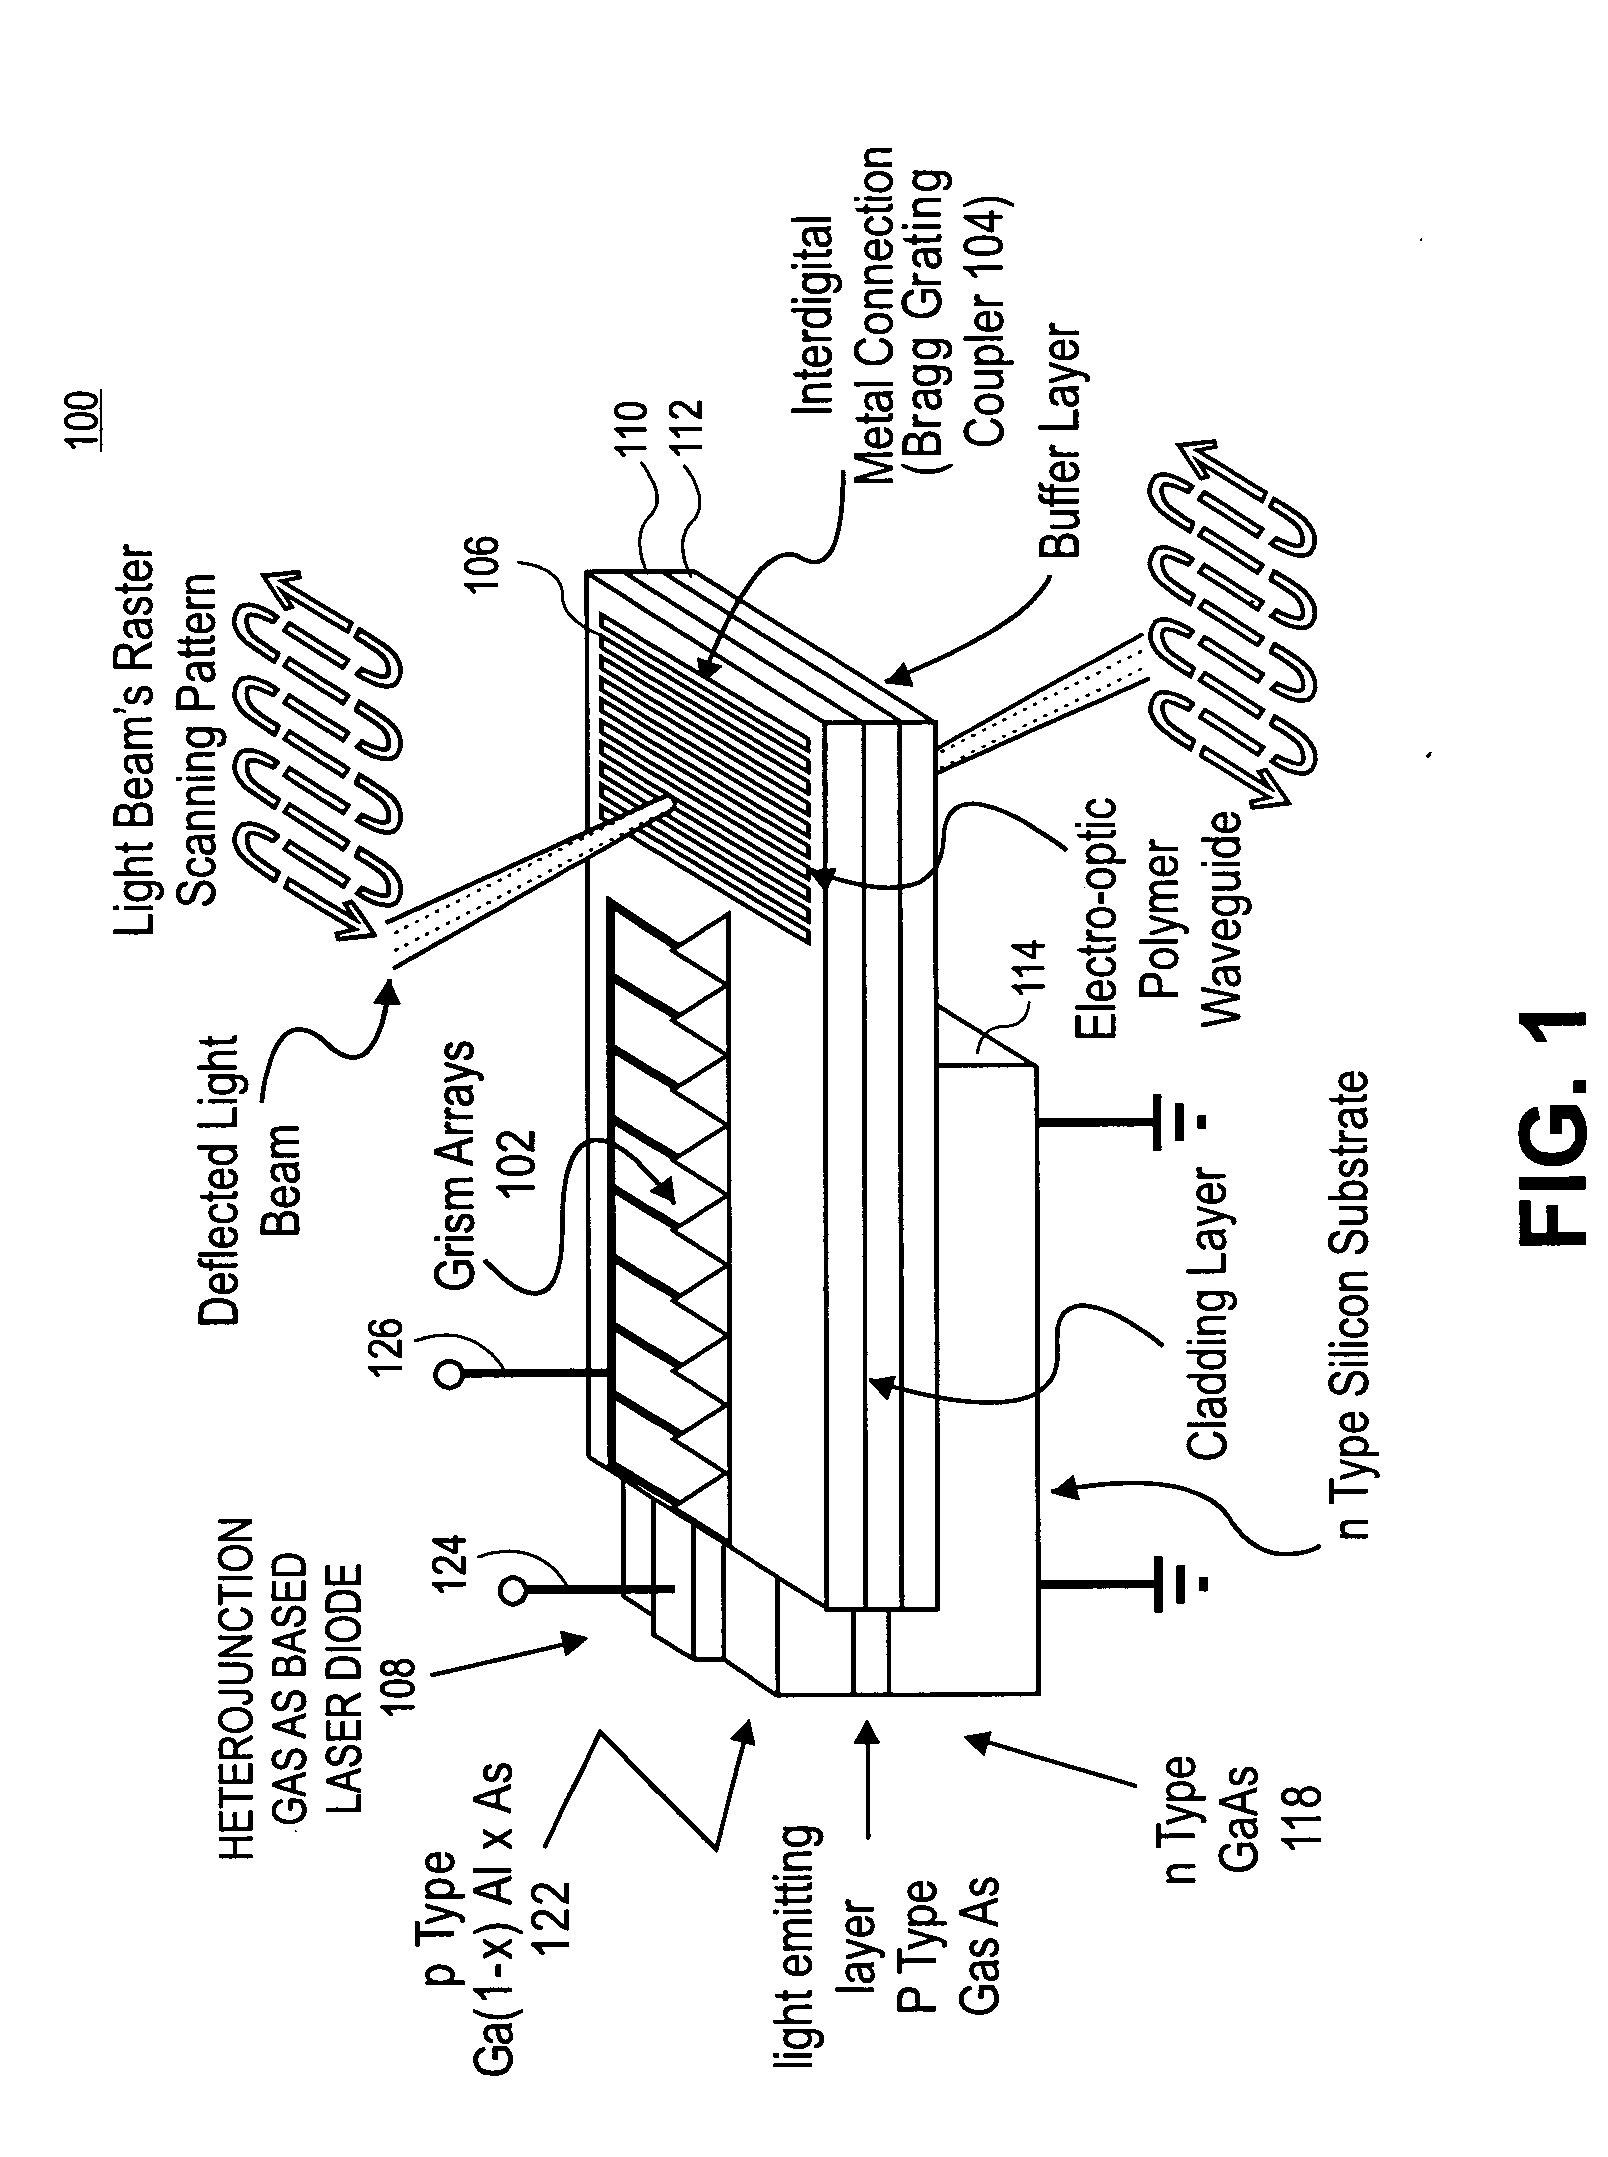 Polymer based electro-optic scanner for image acquisition and display